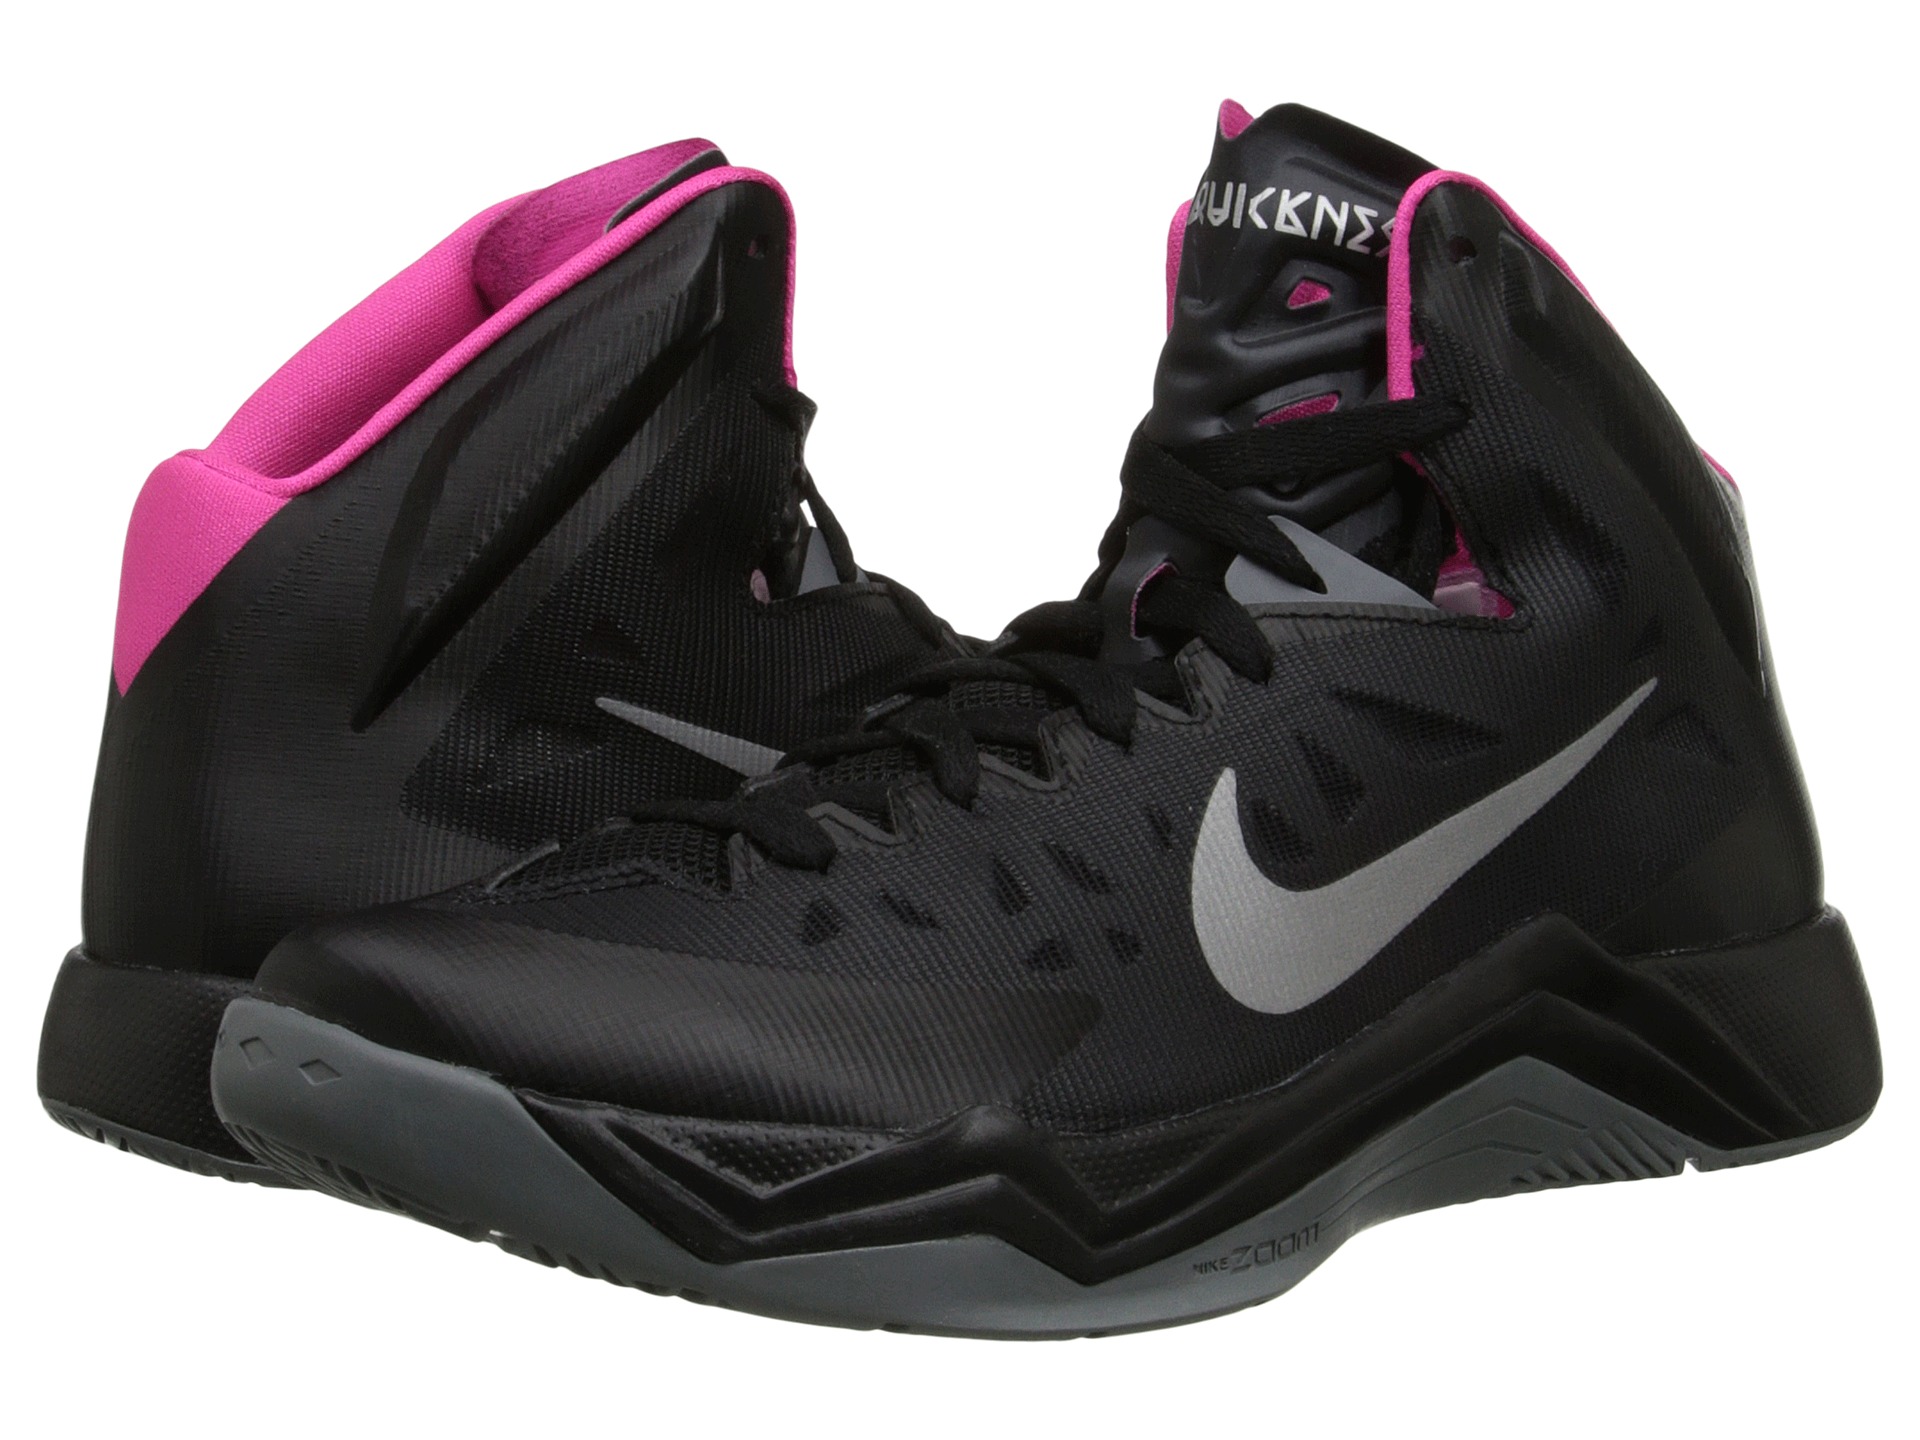 Nike Hyper Quickness, Clothing